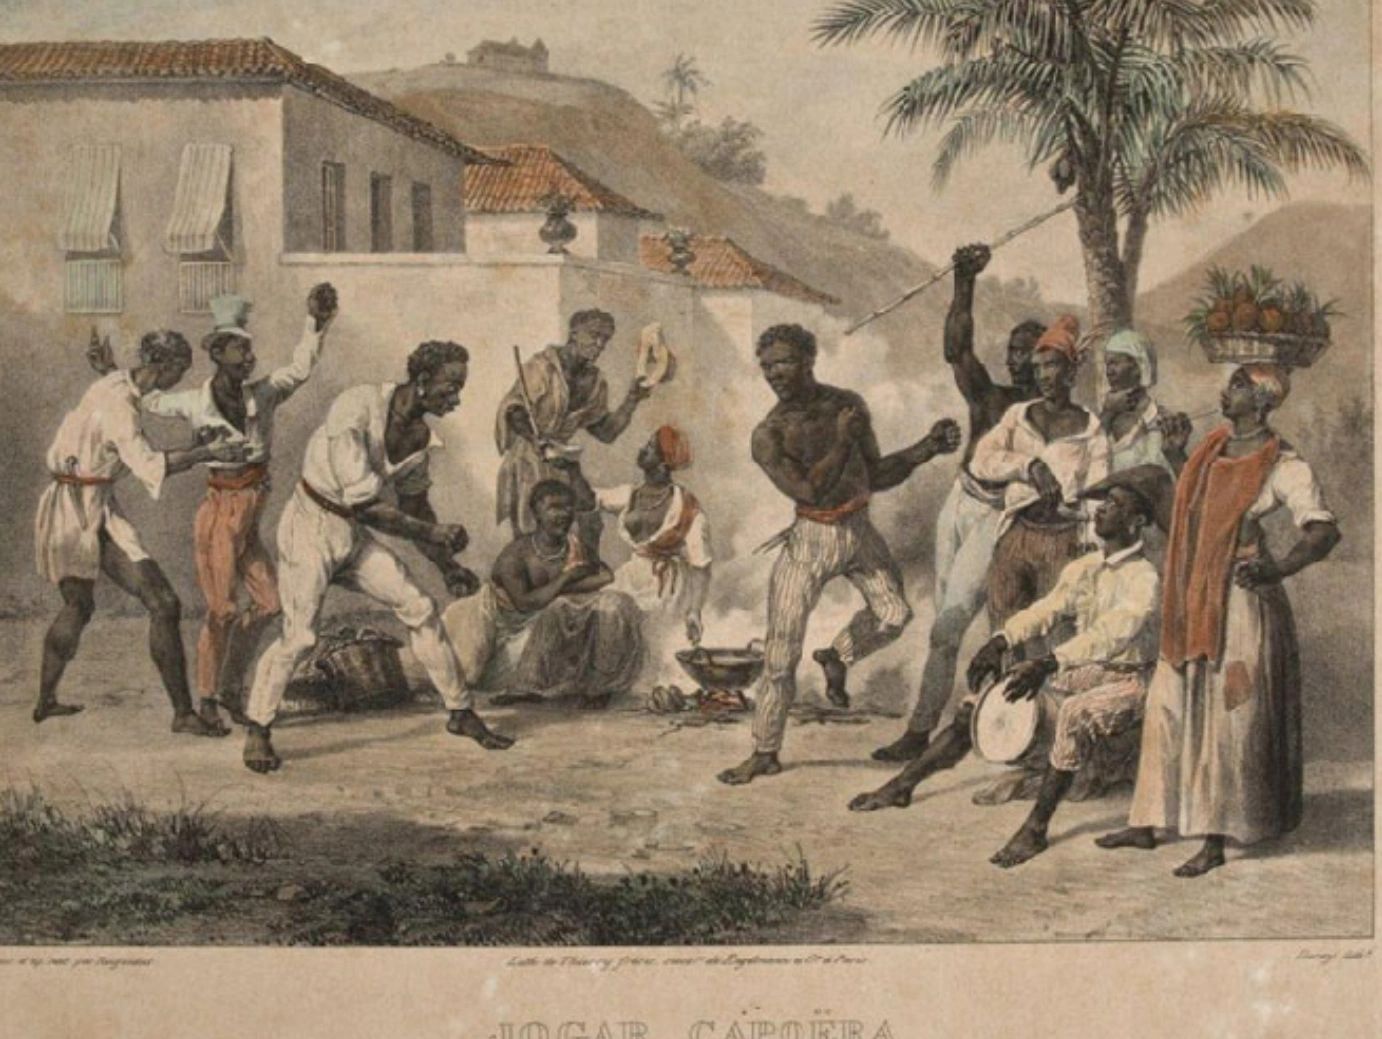 Historical illustration of depicting people playing capoeira